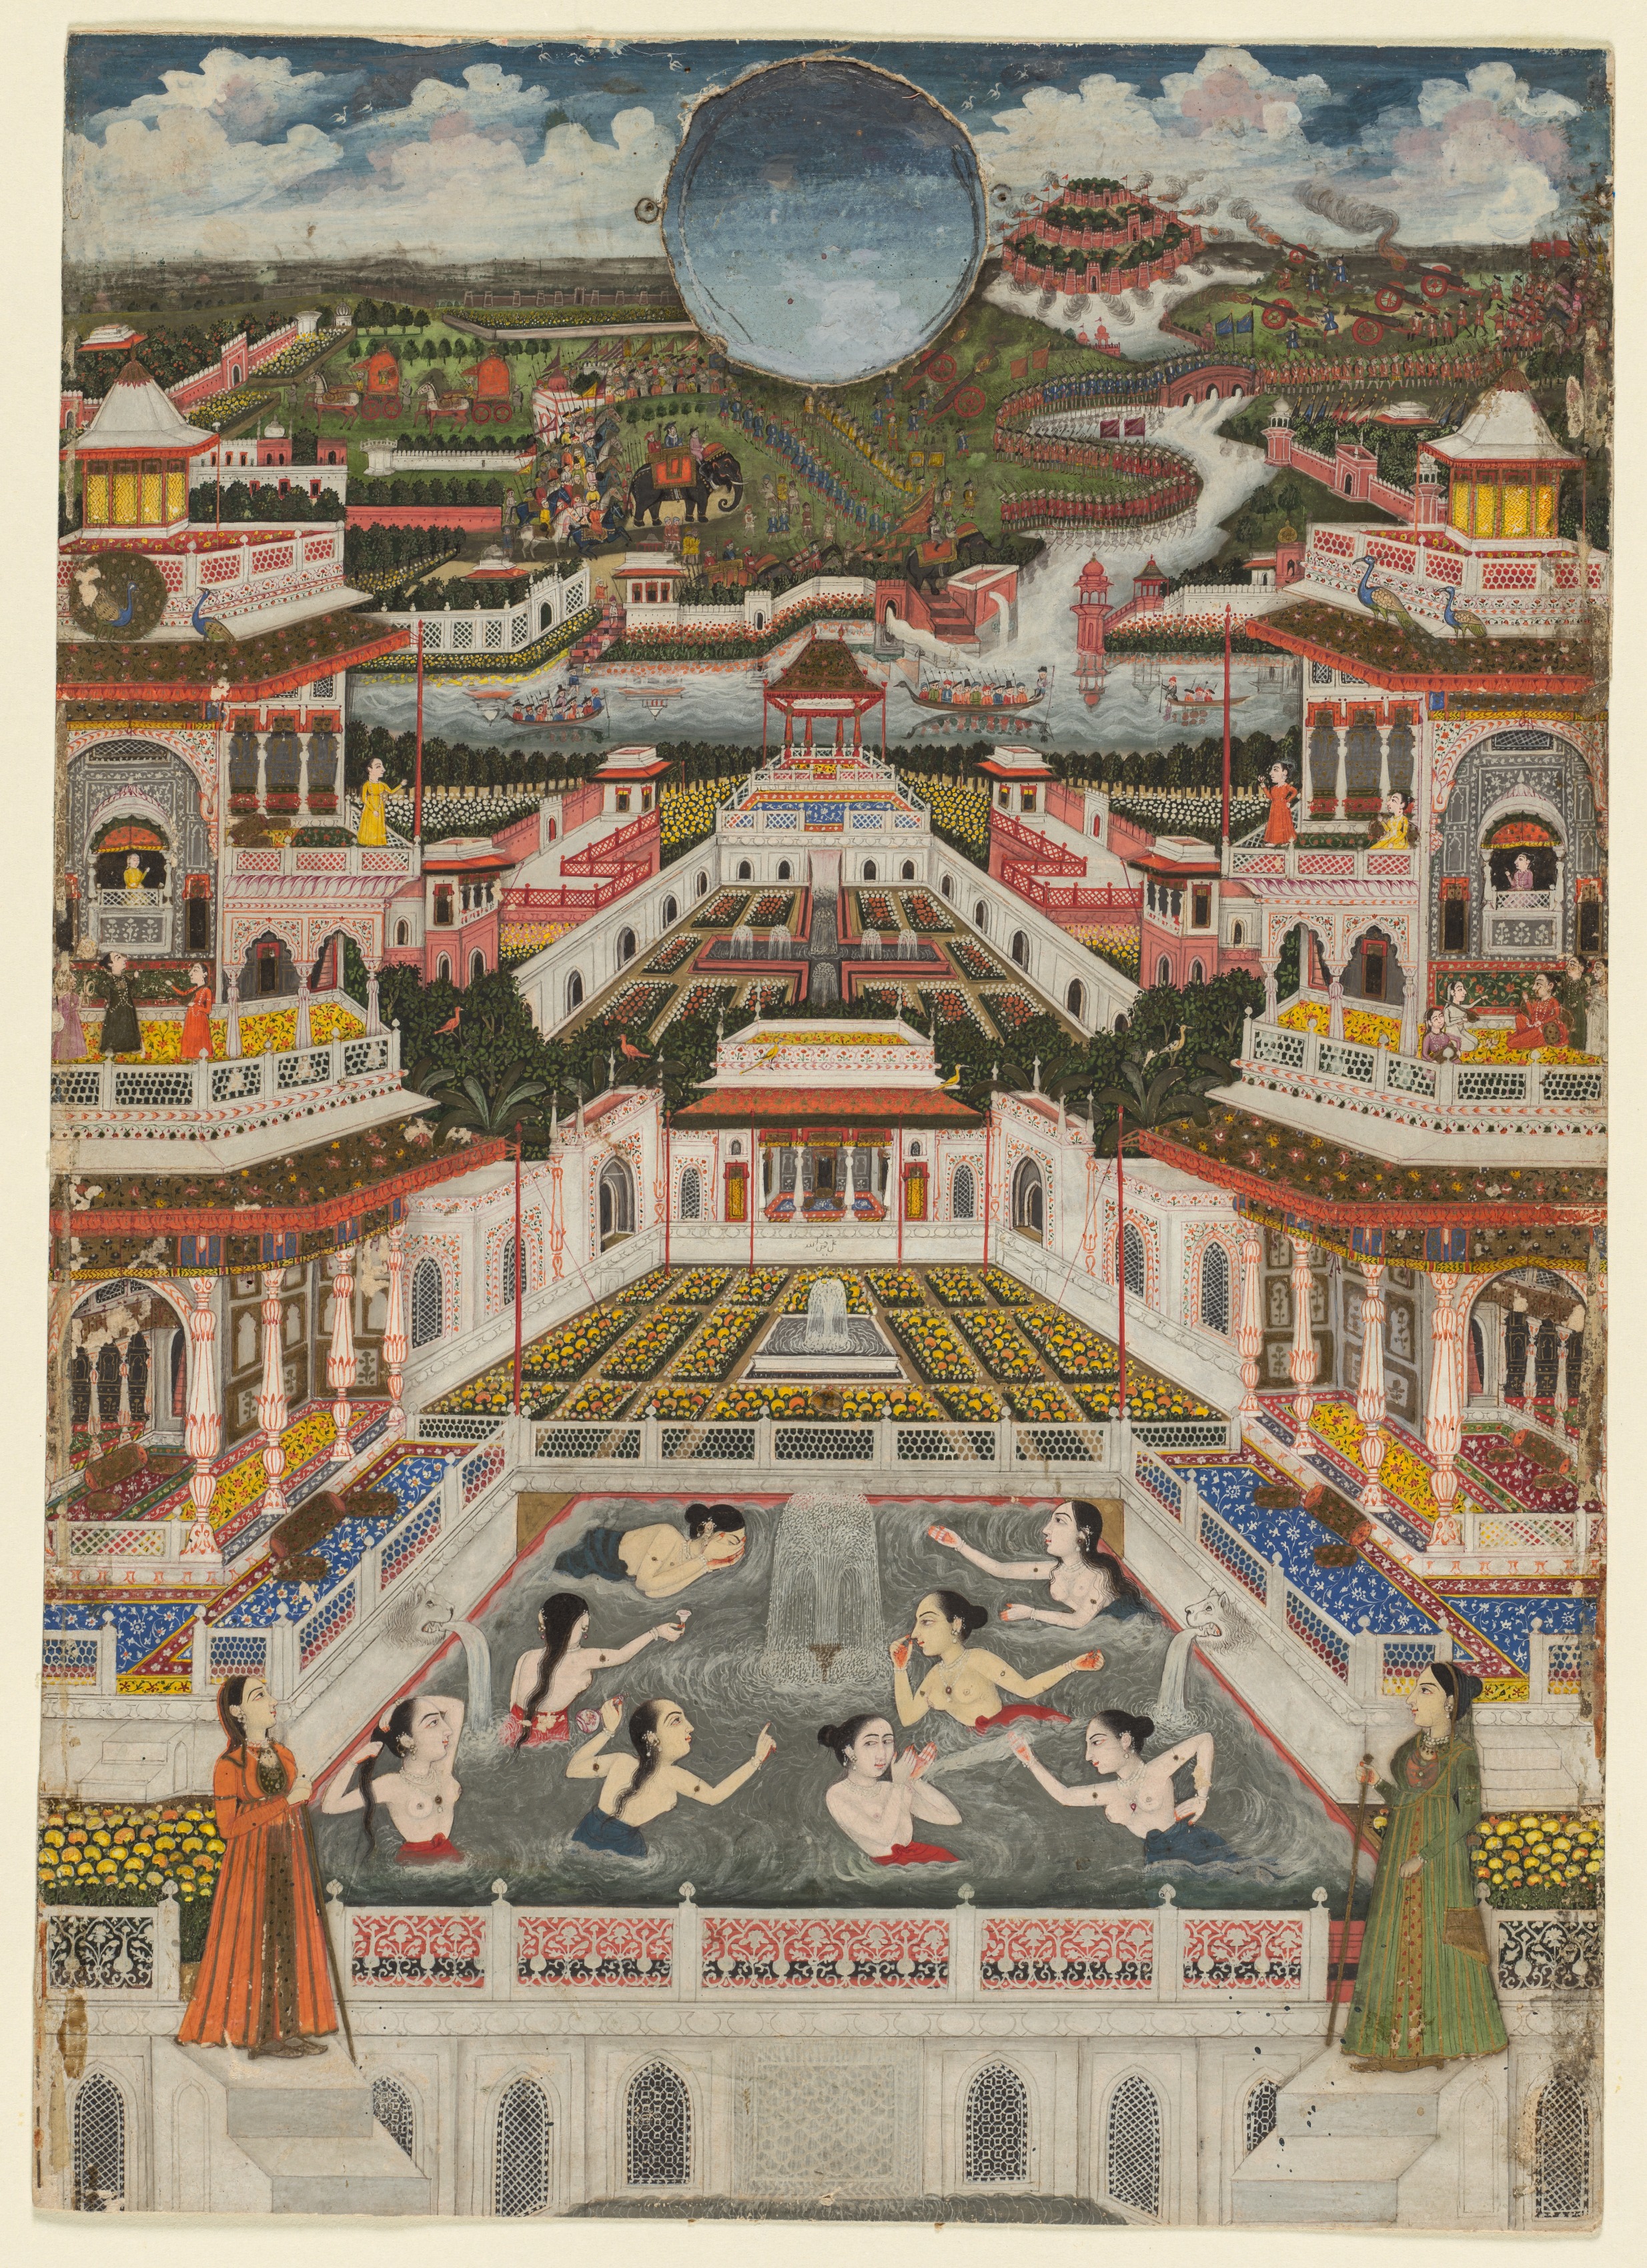 Women bathing before an architectural panorama